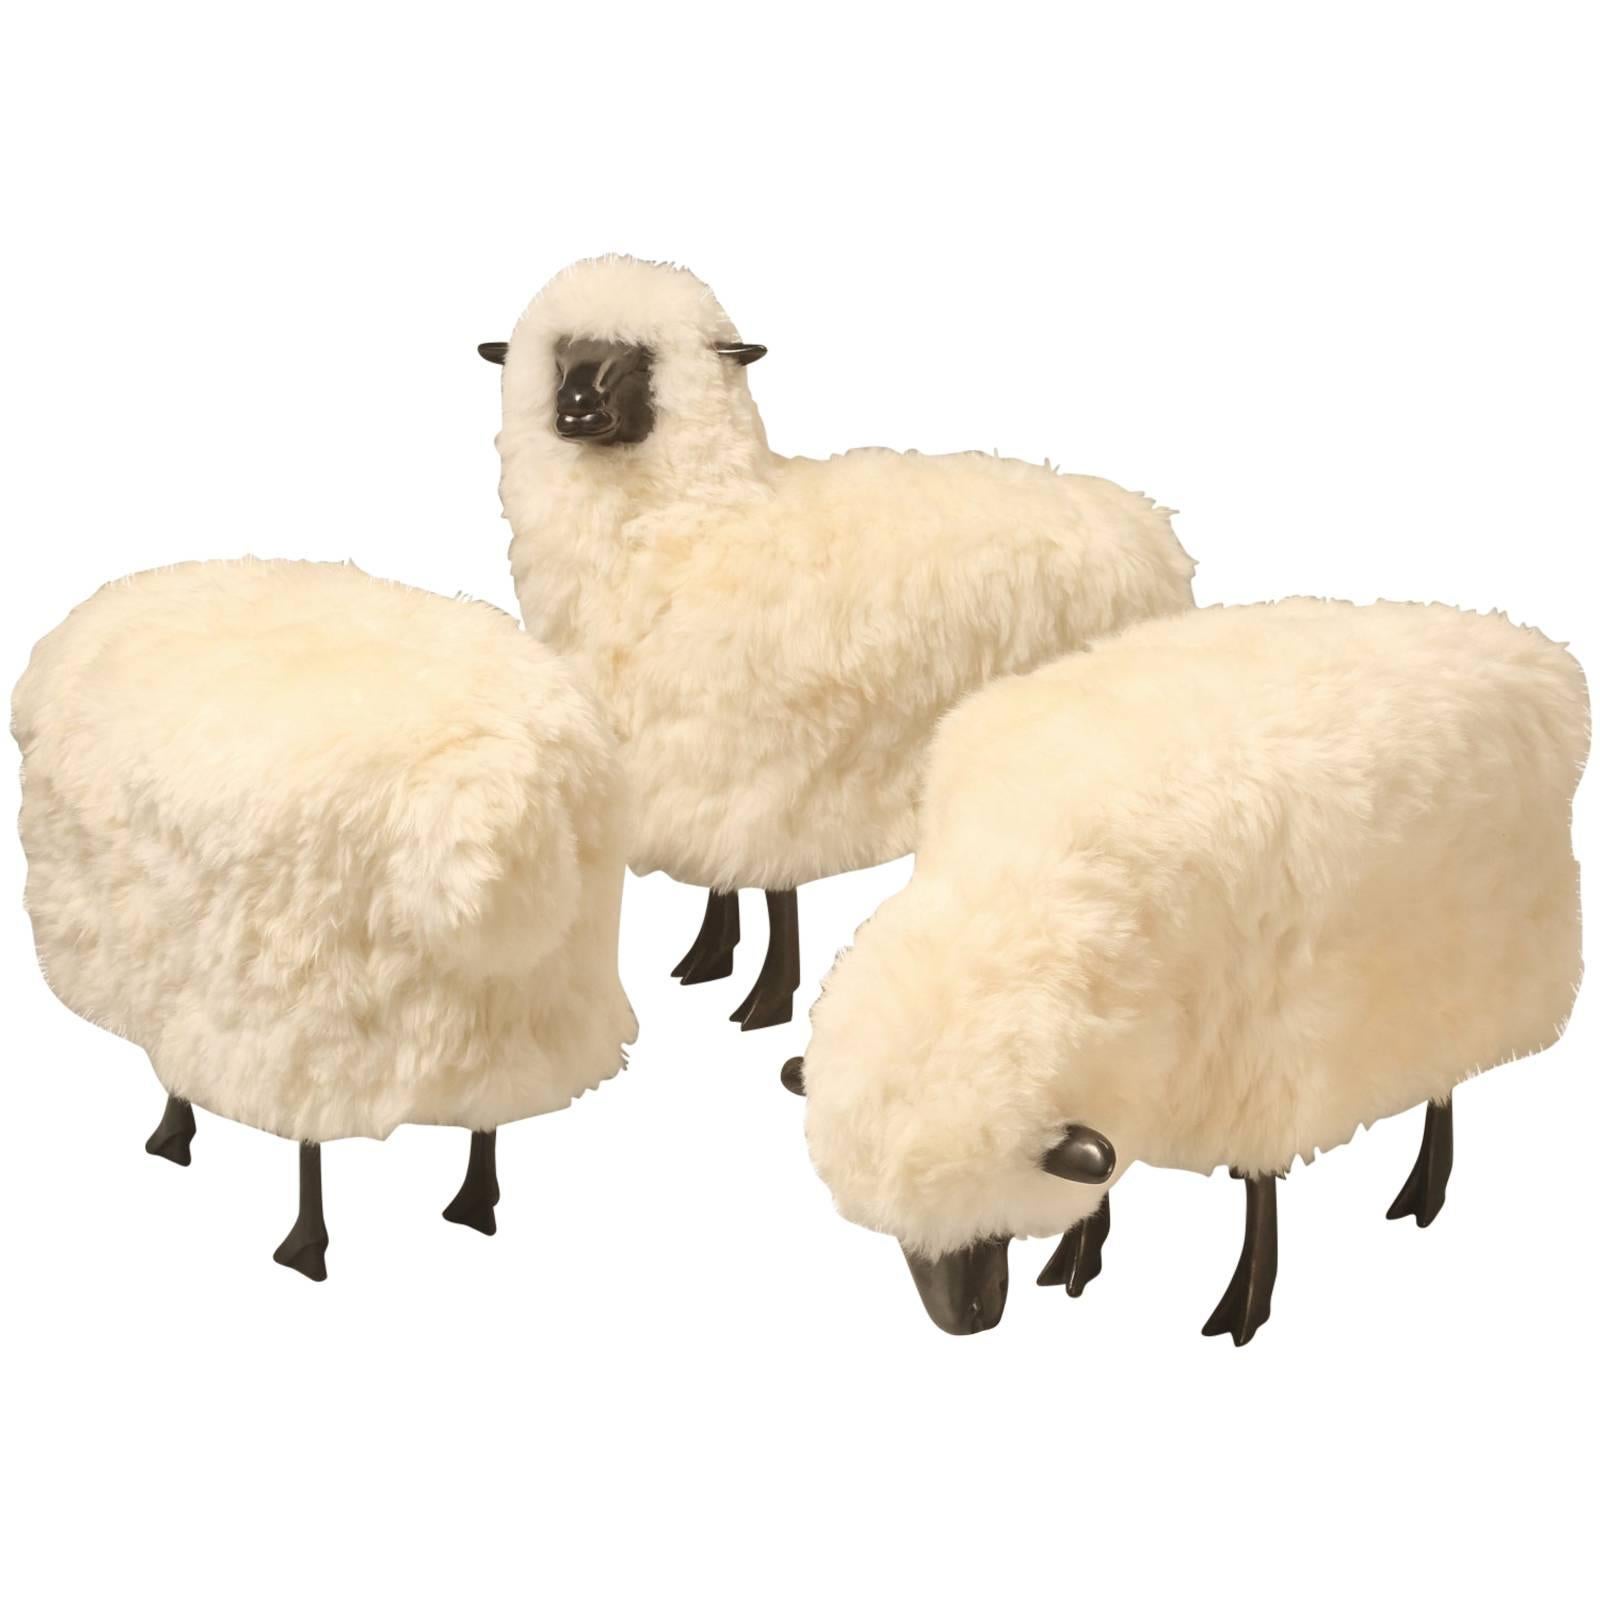  Collection of 3 Sheep from Old Plank